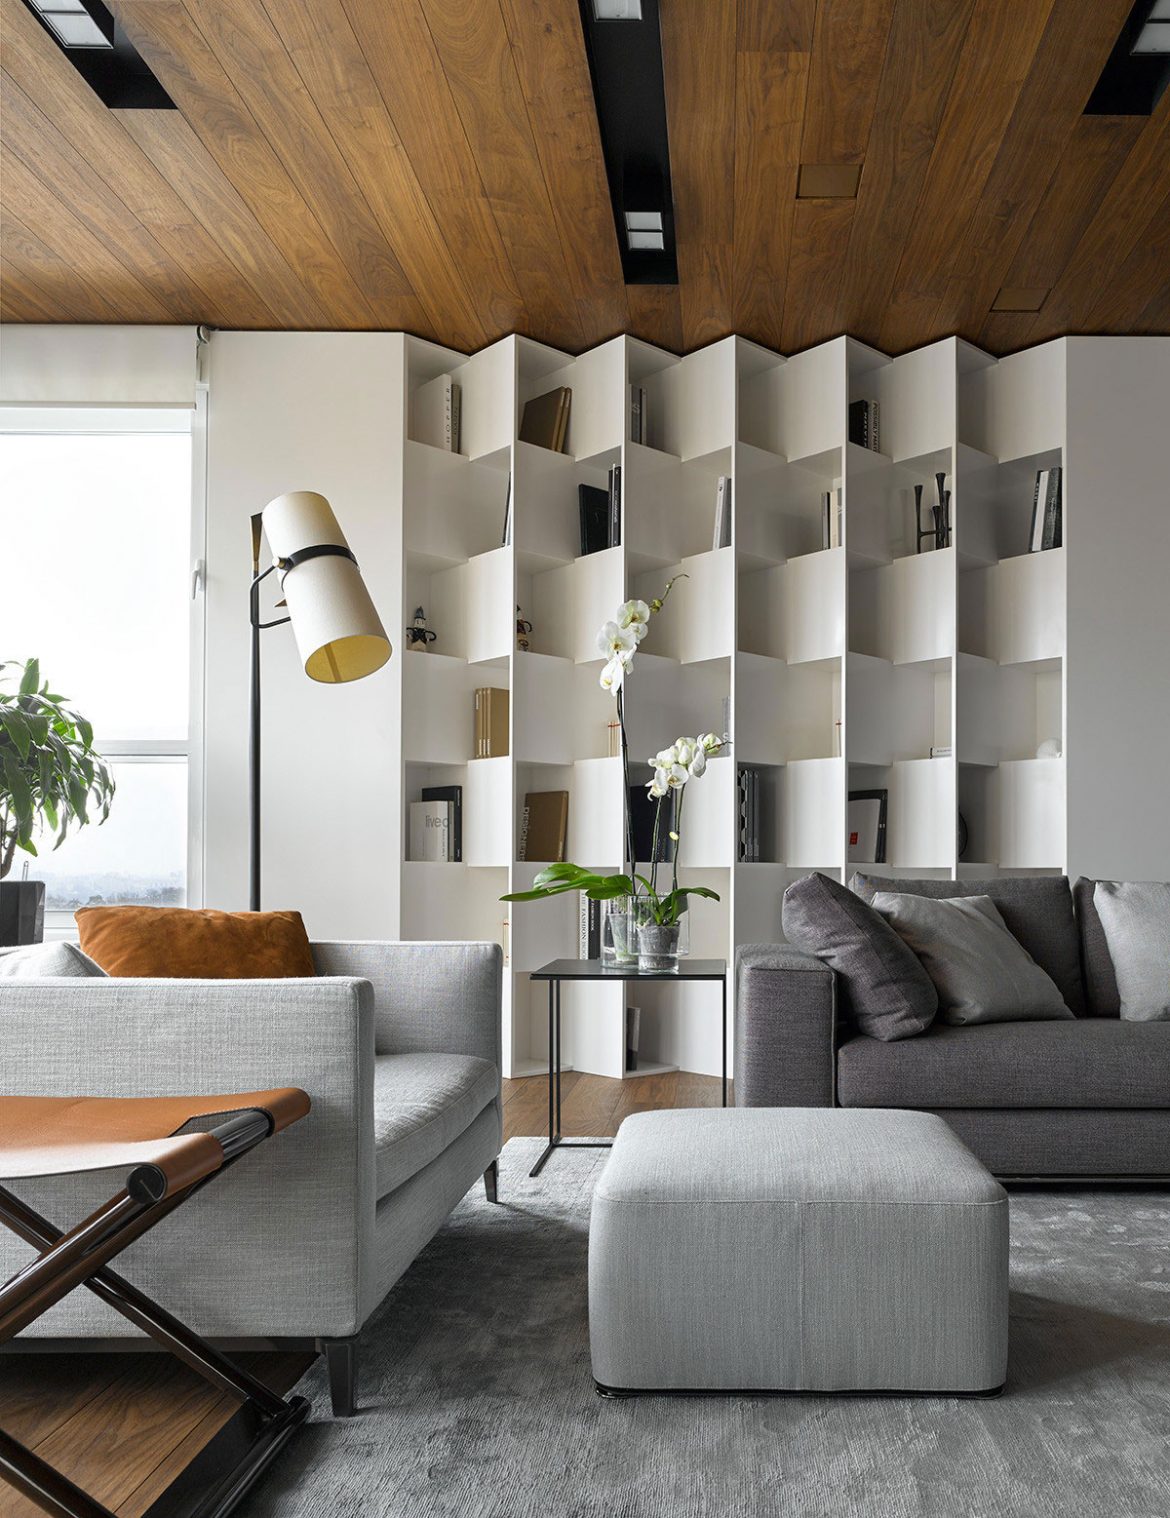 10 MODERN APARTMENT DESIGNS TO INSPIRE YOU